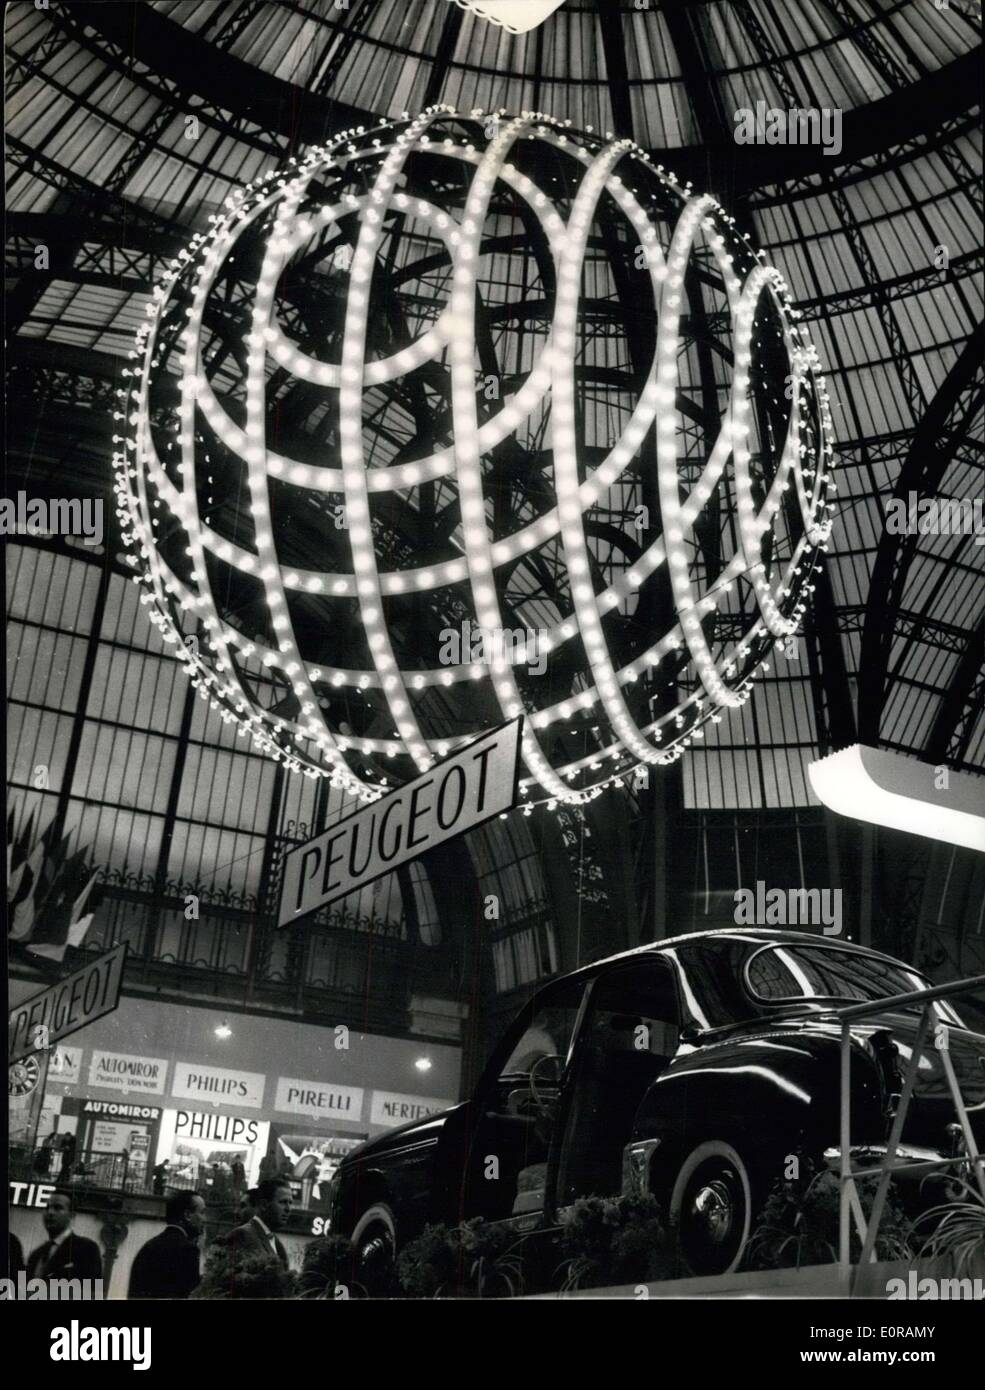 Oct. 03, 1958 - The 45th Motor Show Opened At The Grand Palais Pairs, This Morning. Photo Shows: A Huge sphere carrying numberless electric blues illuminating the giant hall at the Grand Palais where the motor show is being held now. Stock Photo